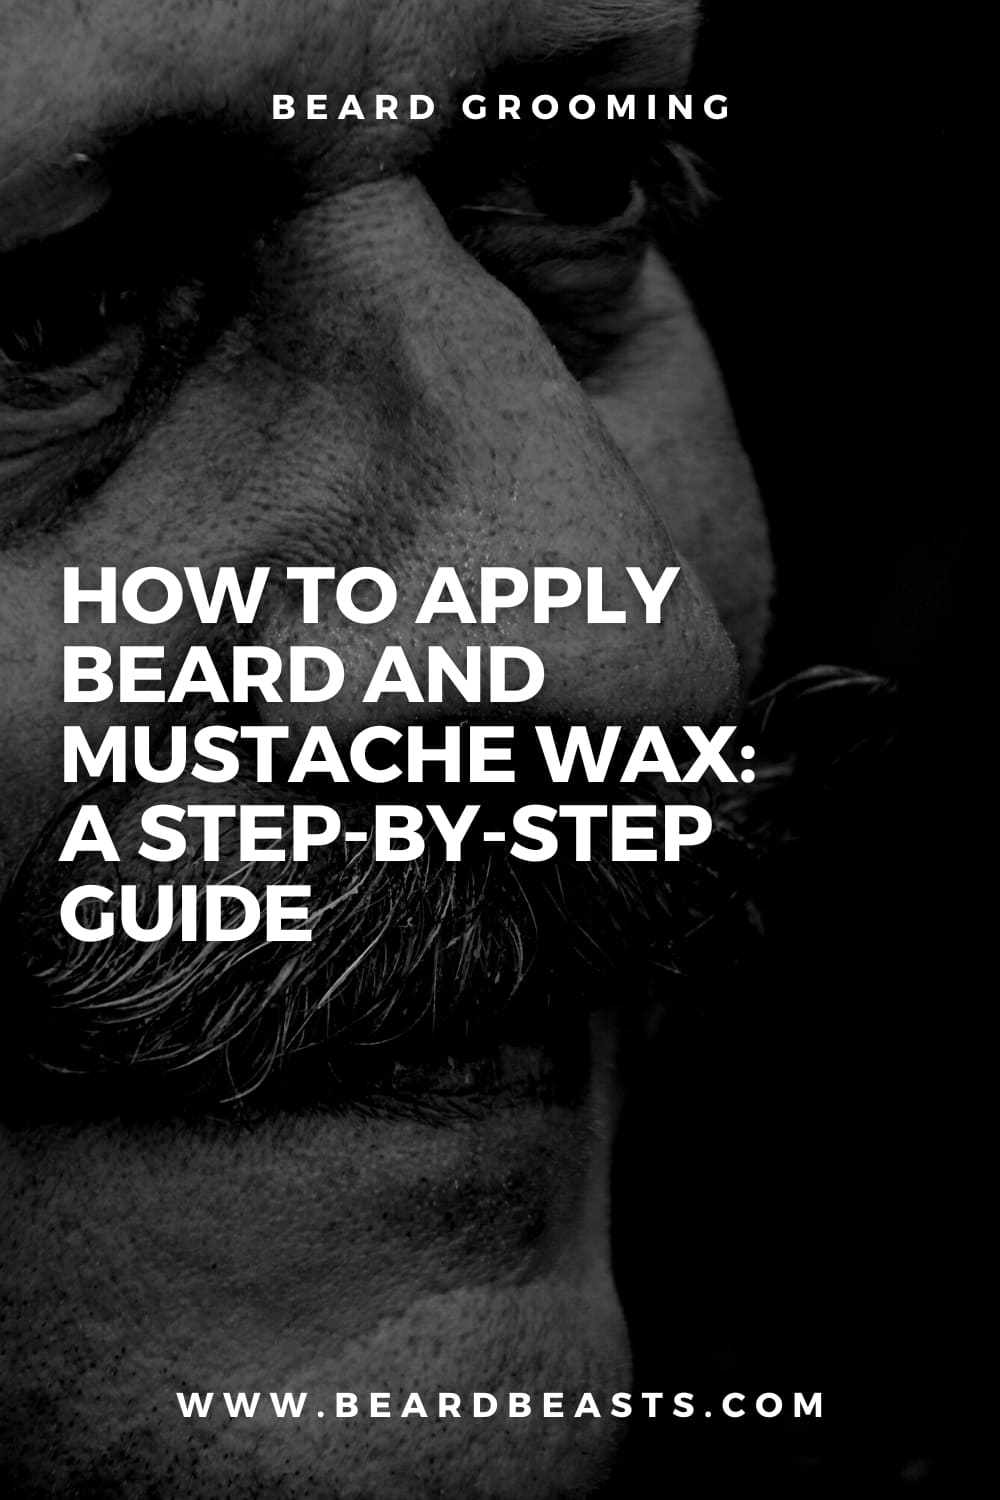 How to Apply Beard and Mustache Wax: A Step-by-Step Guide Pinterest Pin